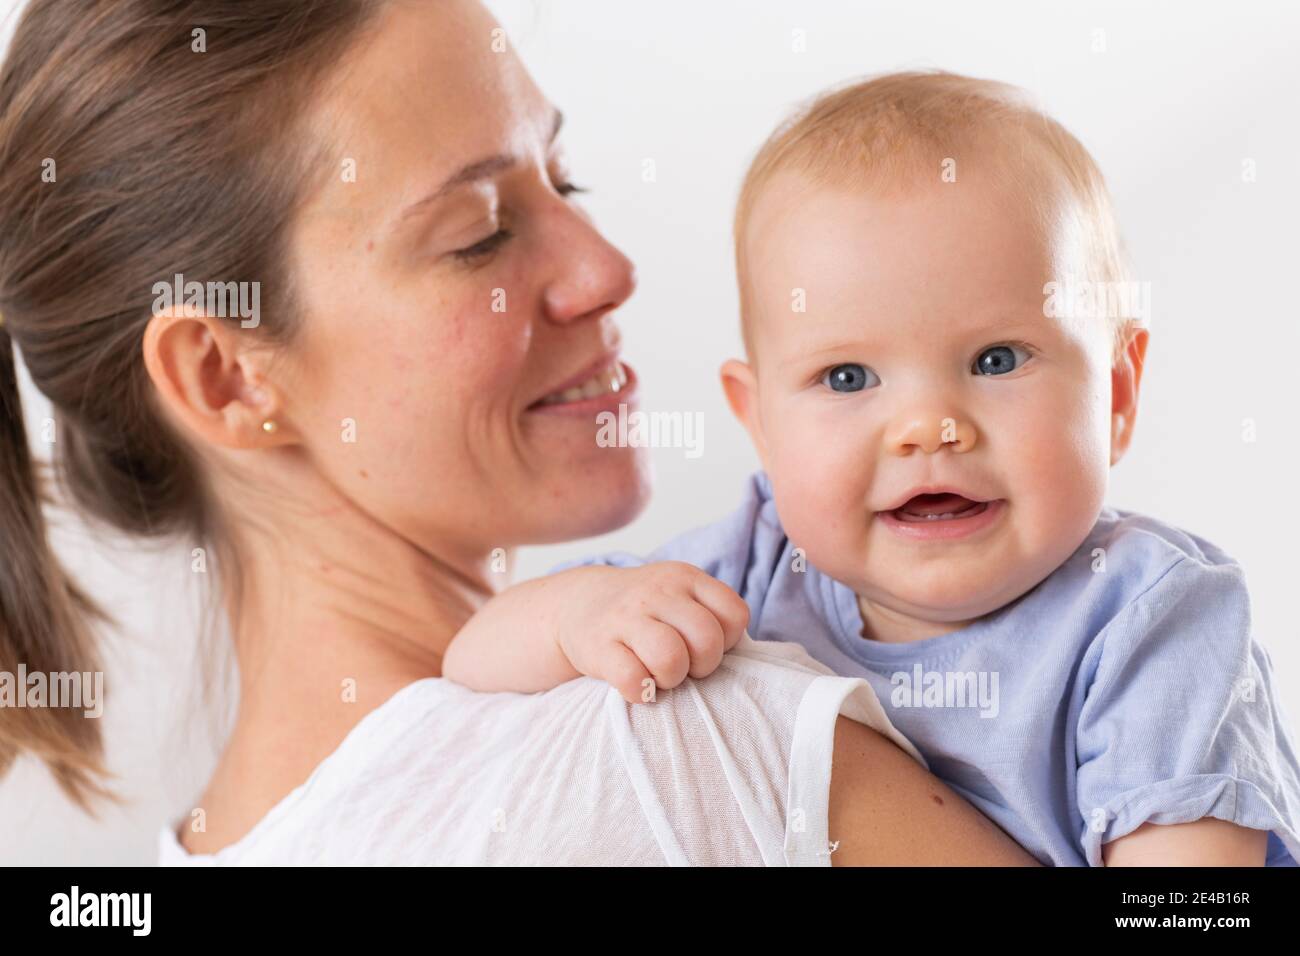 Mother and baby Stock Photo